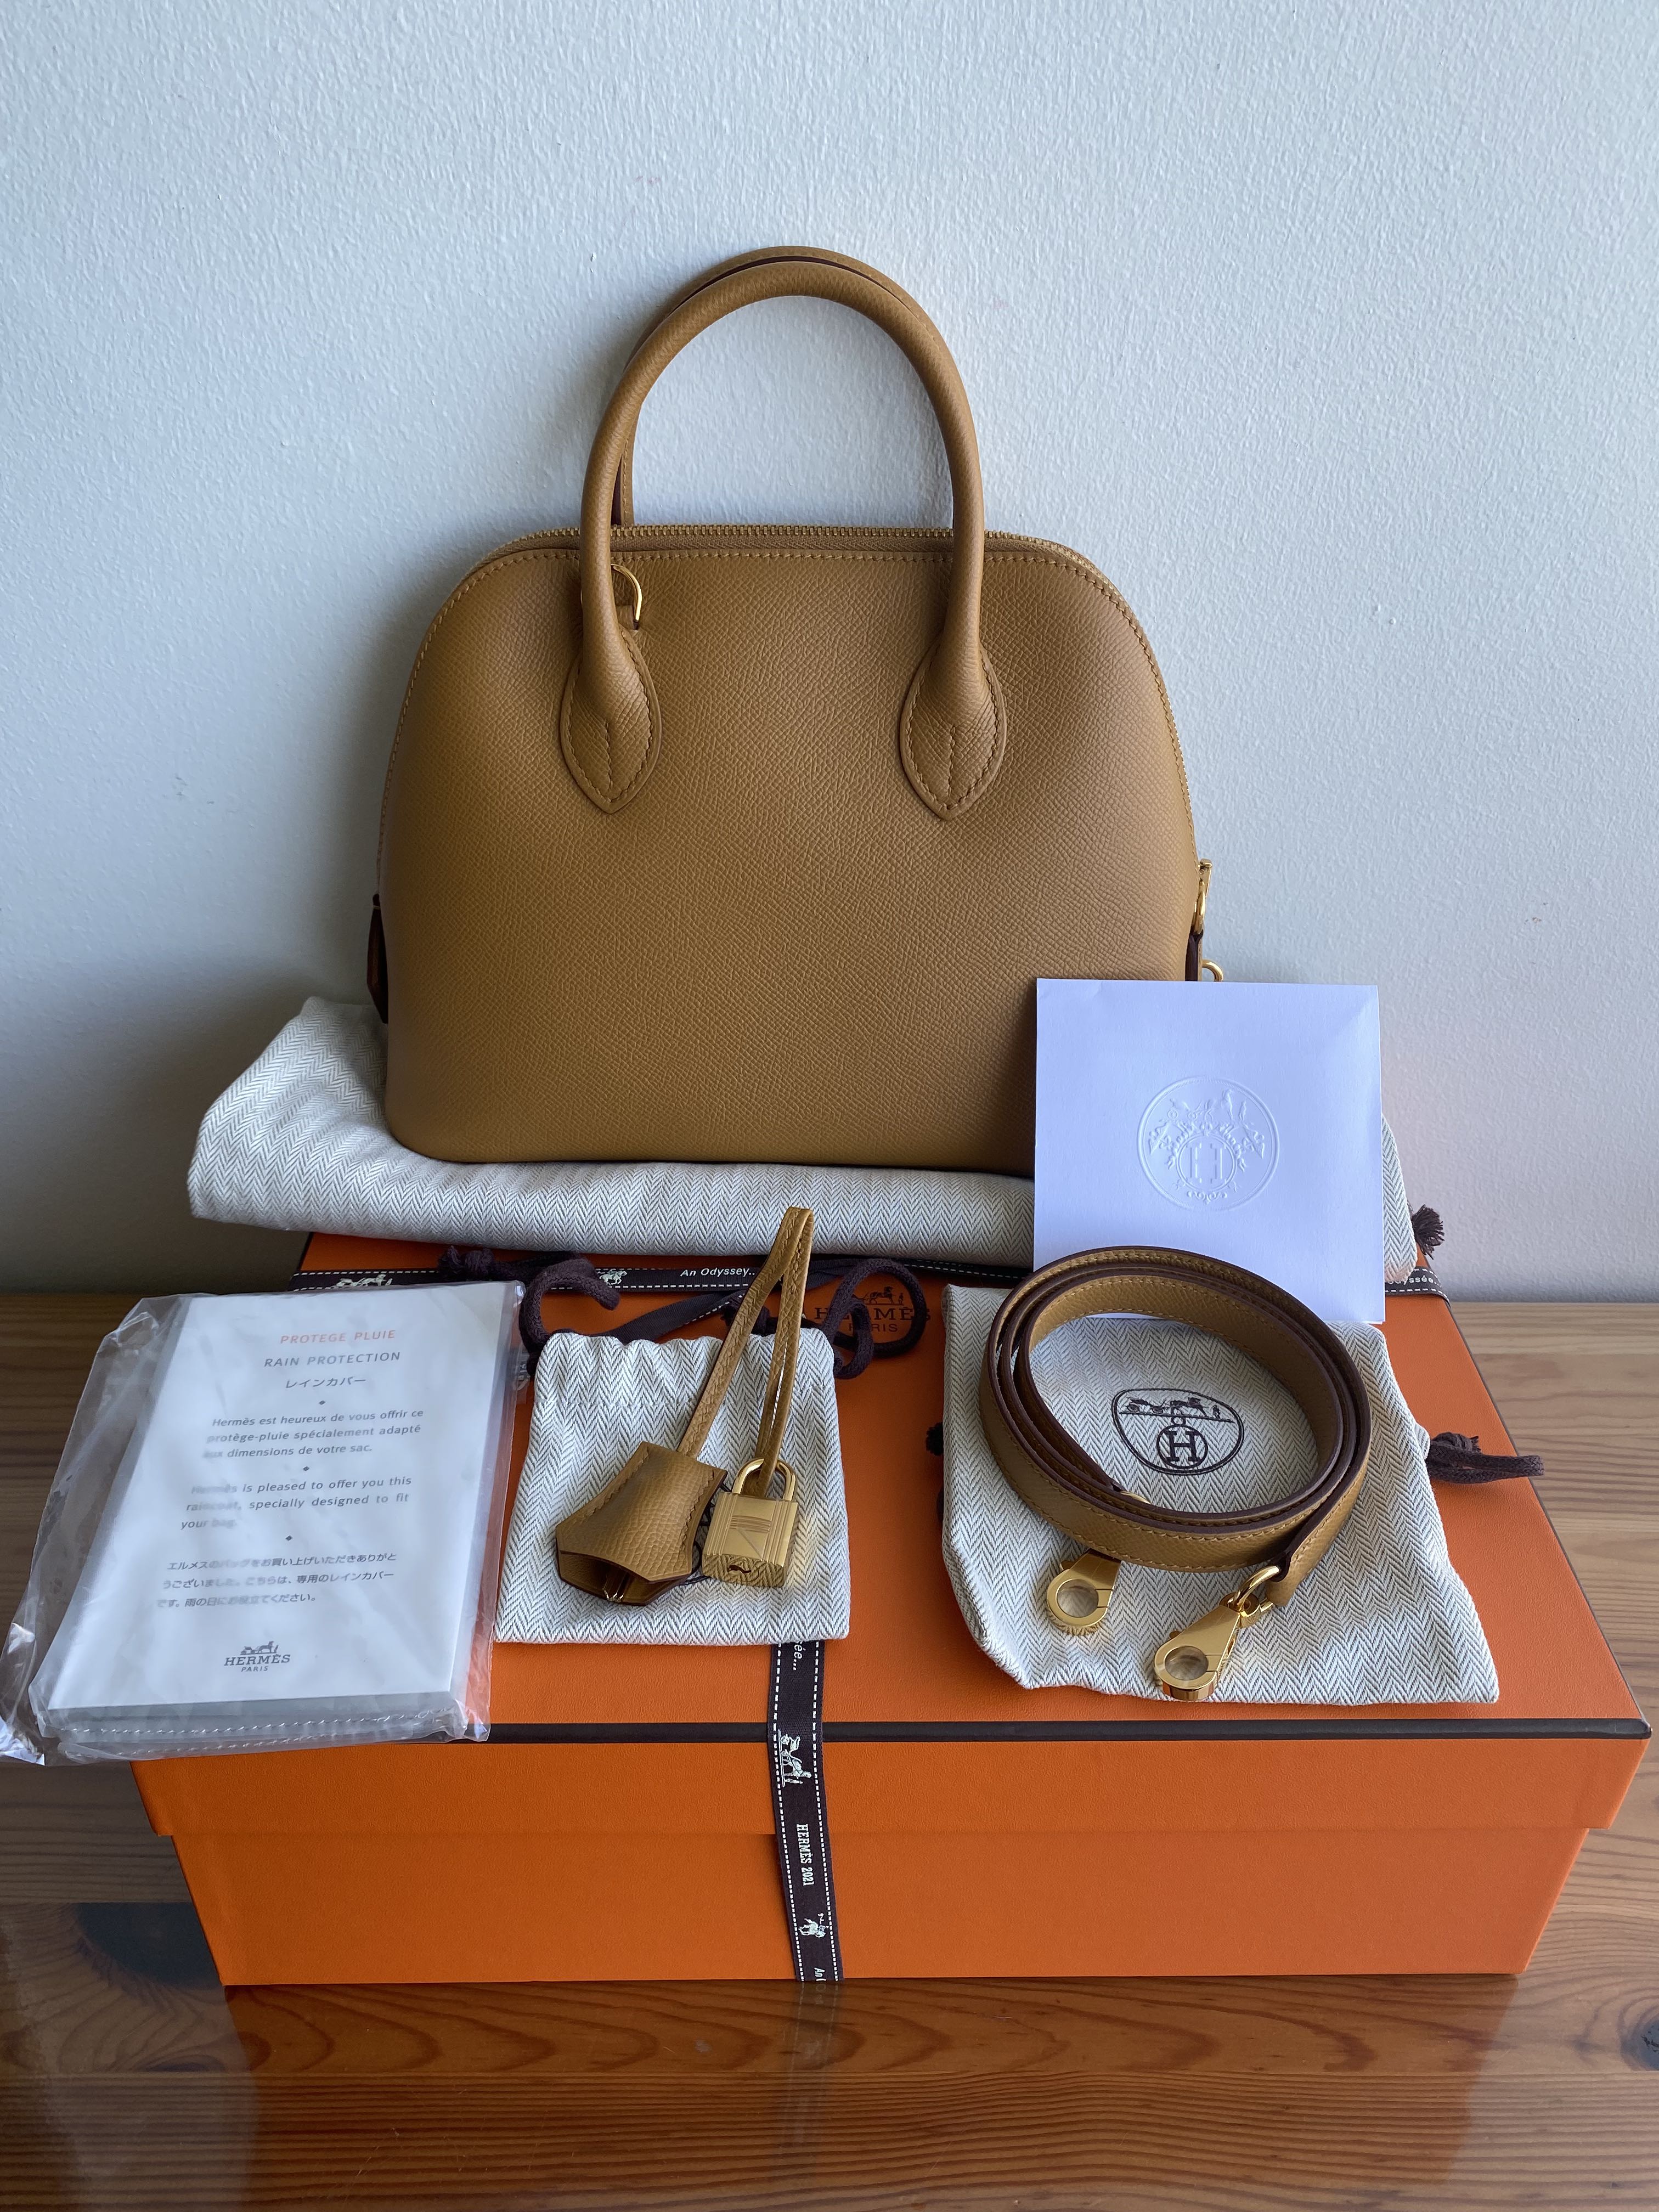 *SOLD* BNIB 25 Hermes Bolide 1923 (new size for 2021)